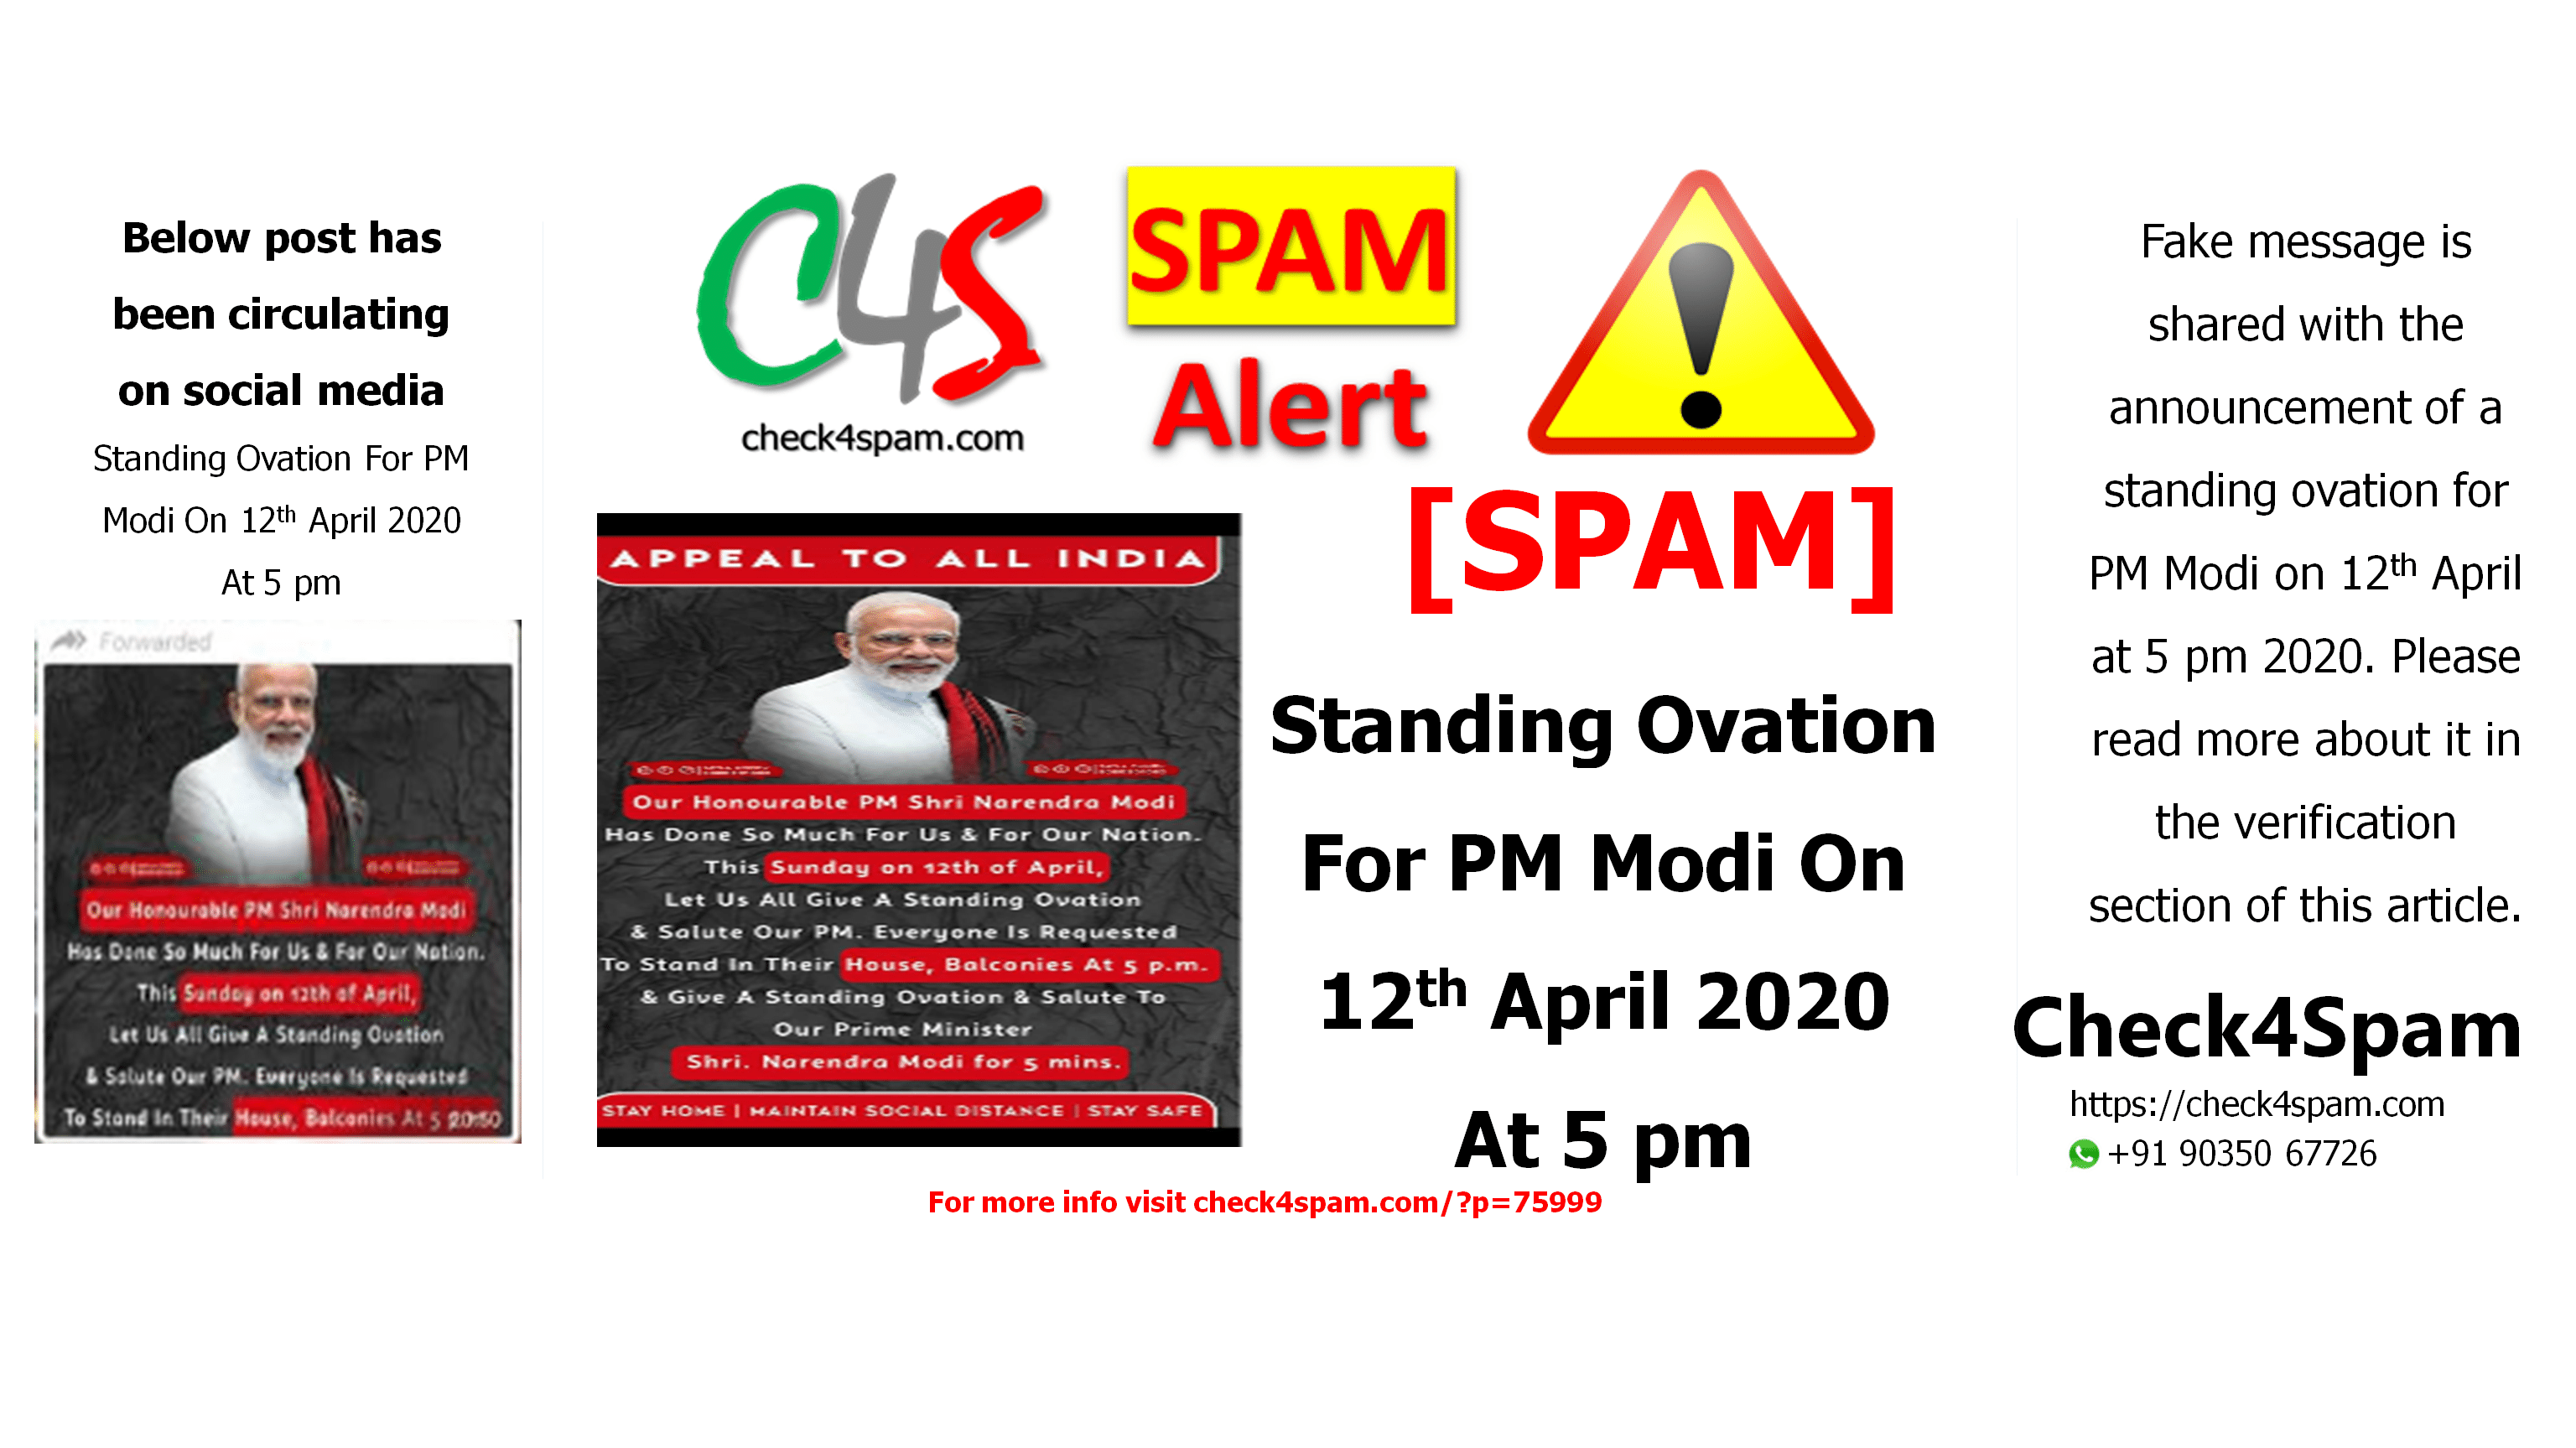 Standing Ovation For PM Modi On 12th April 2020 At 5 pm